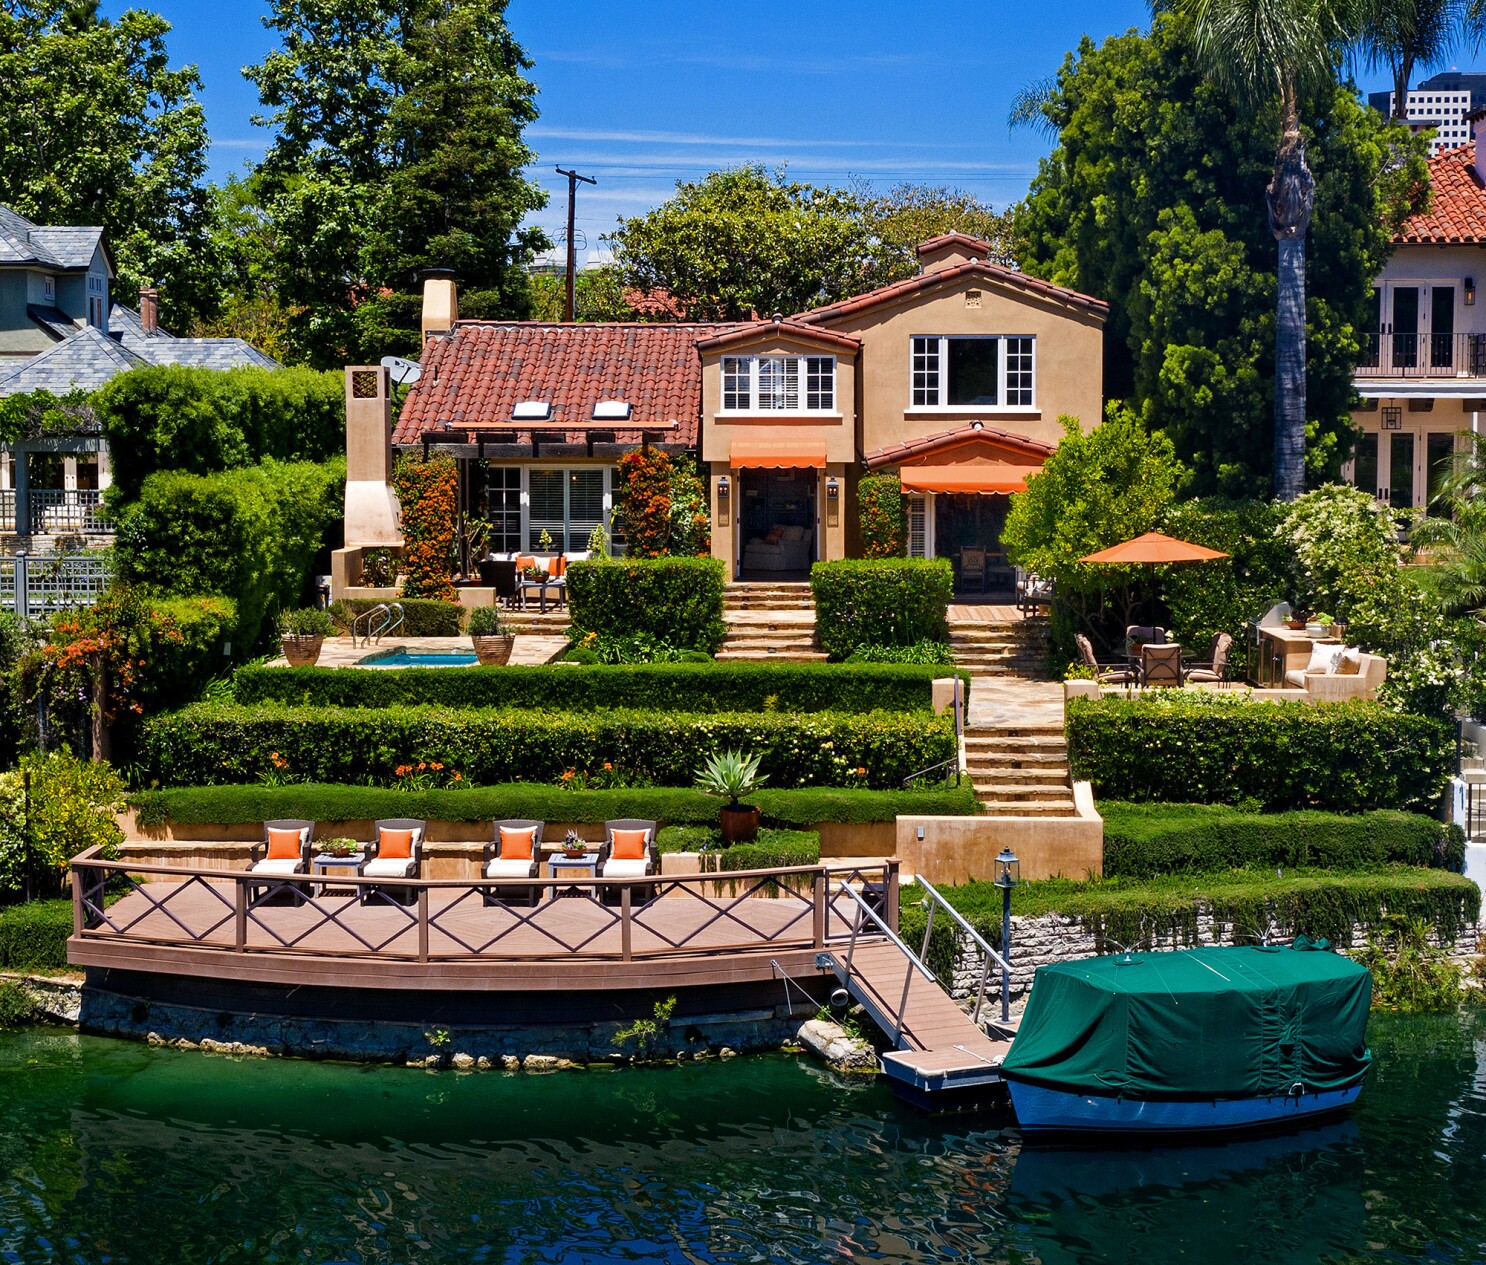 Disney Home On Toluca Lake Waterfront Lands A Buyer Los Angeles Times